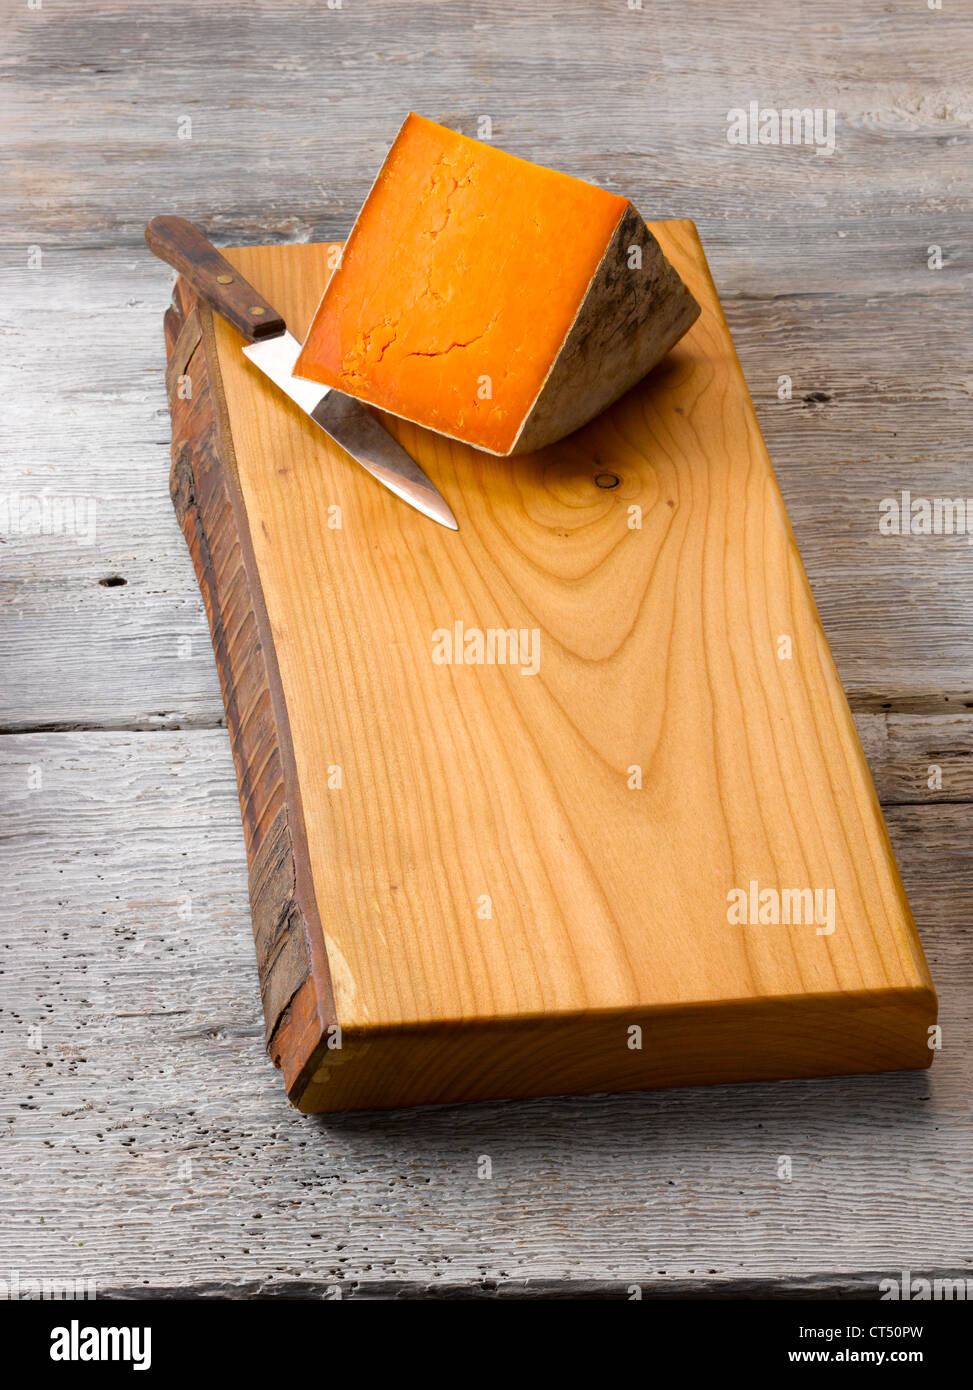 Rustic wood chopping board with cheese Stock Photo